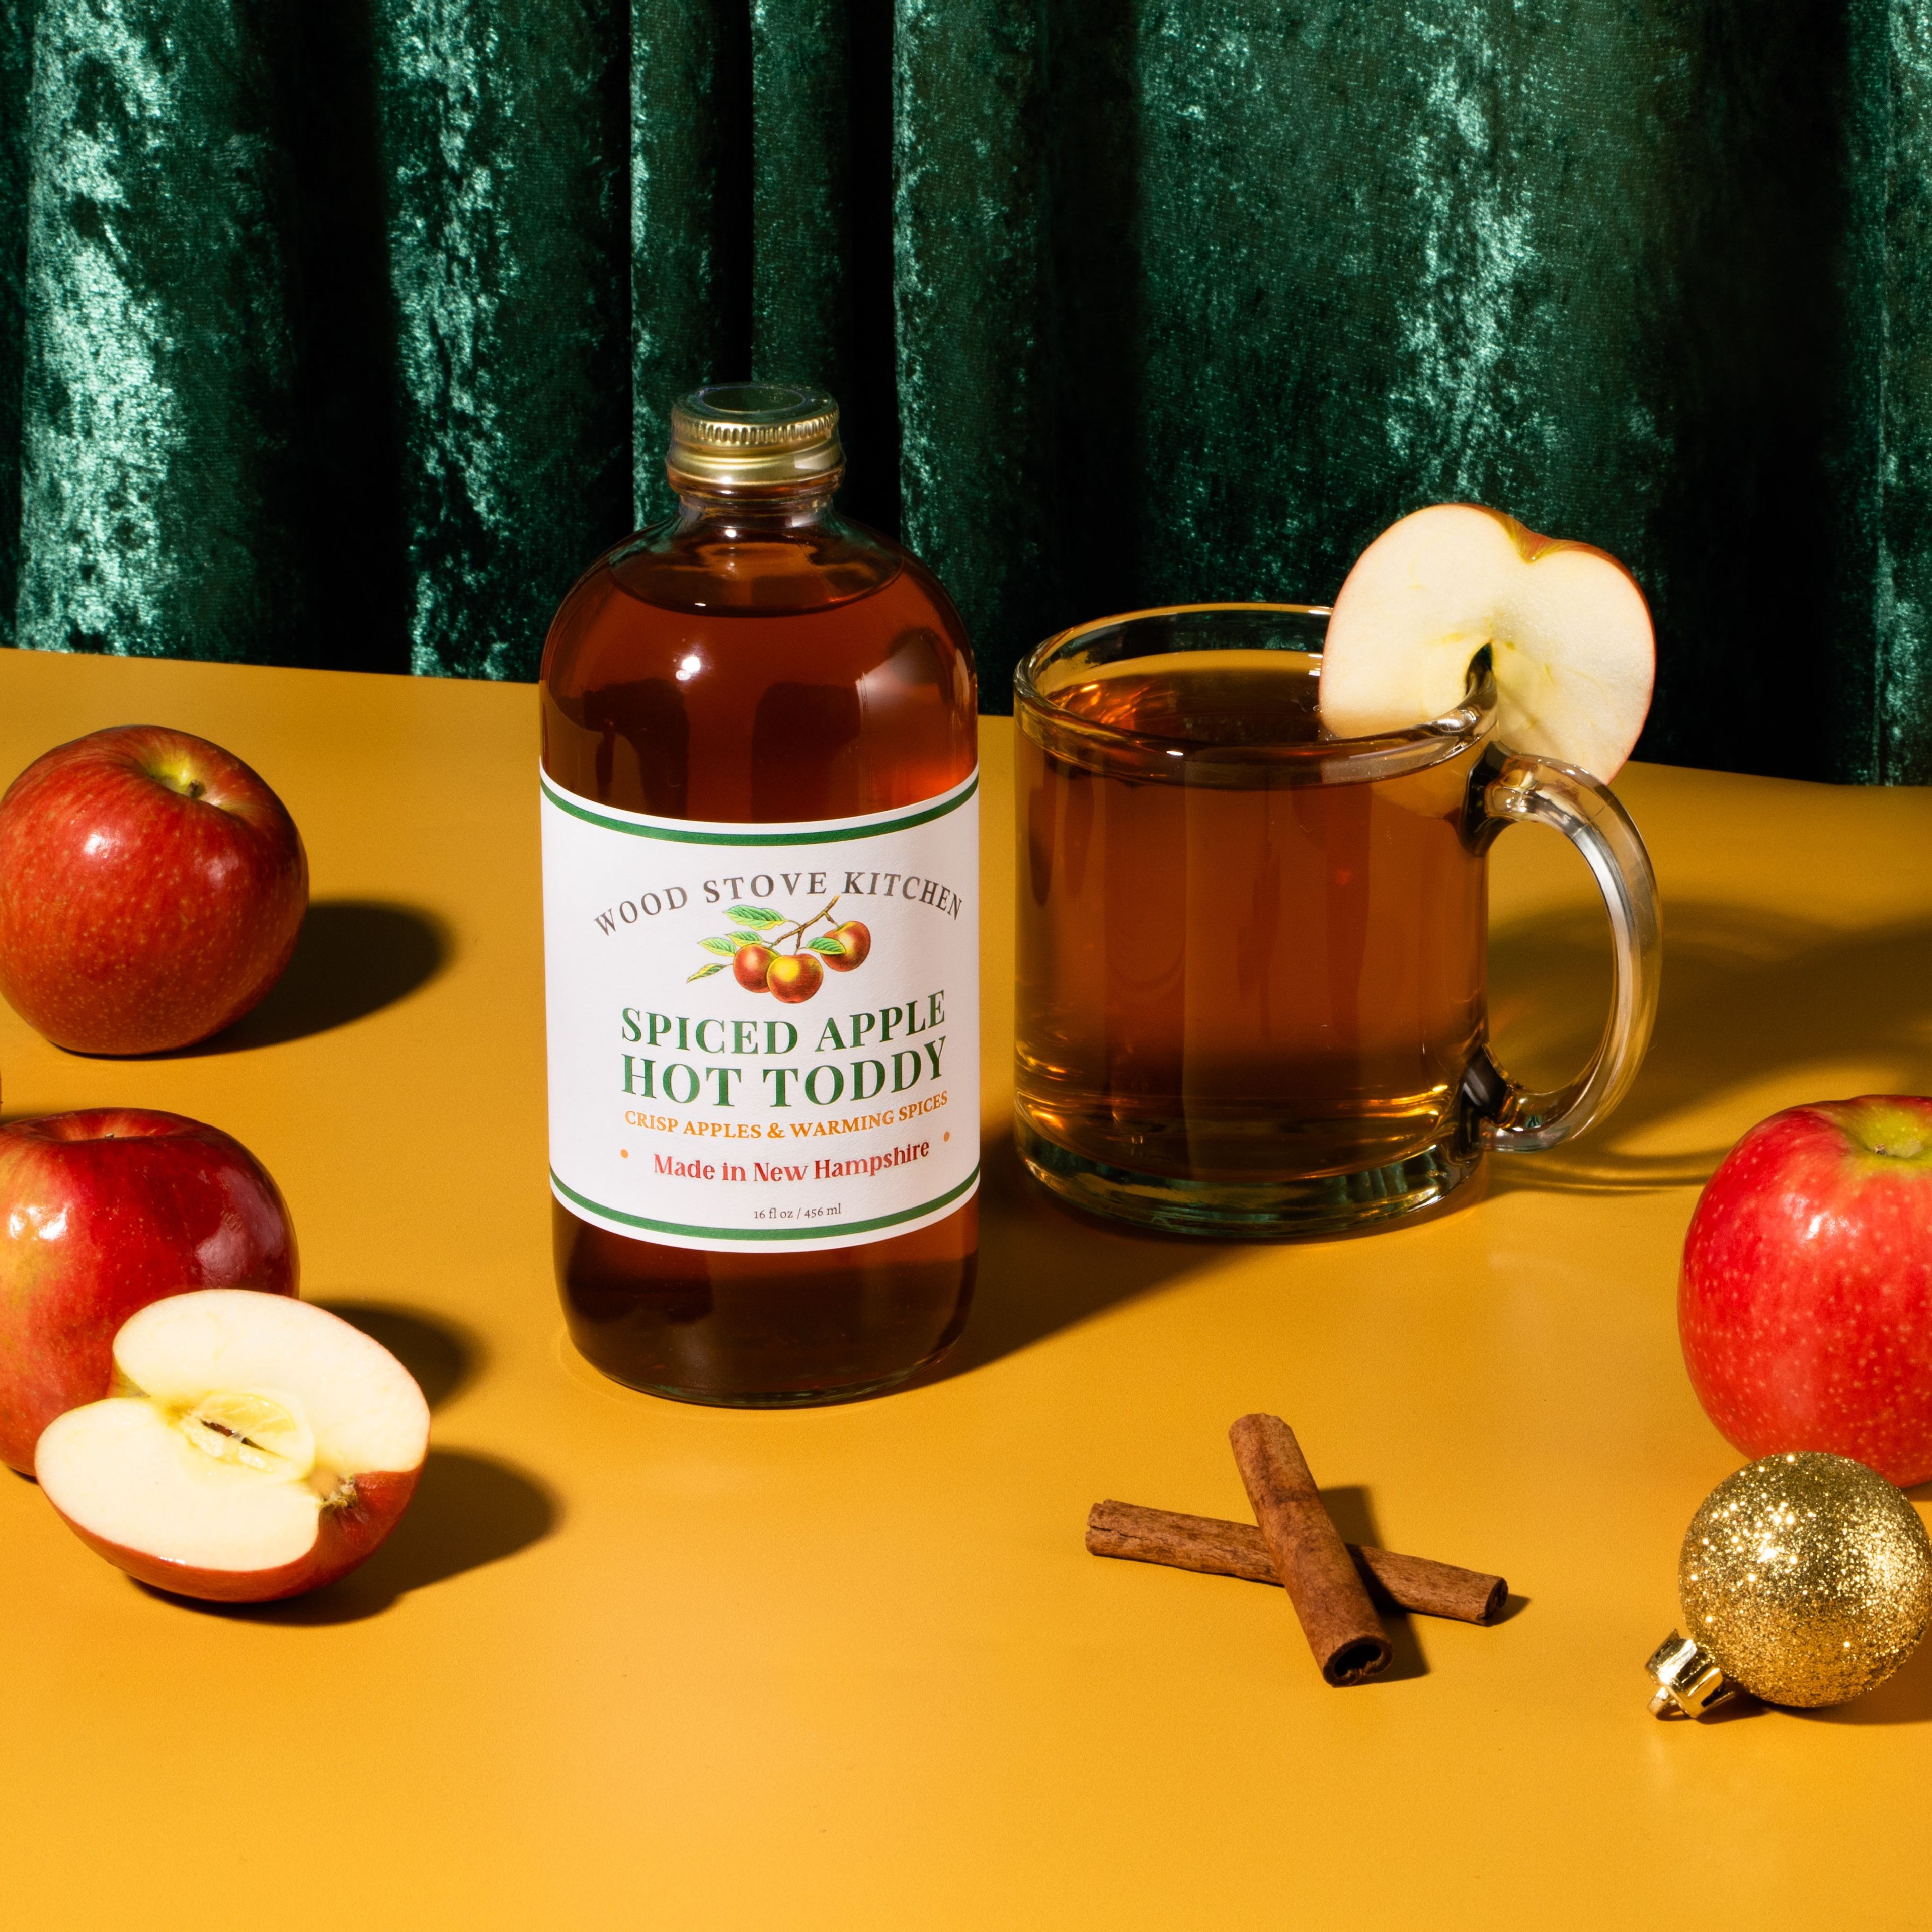 Spiced Apple Hot Toddy